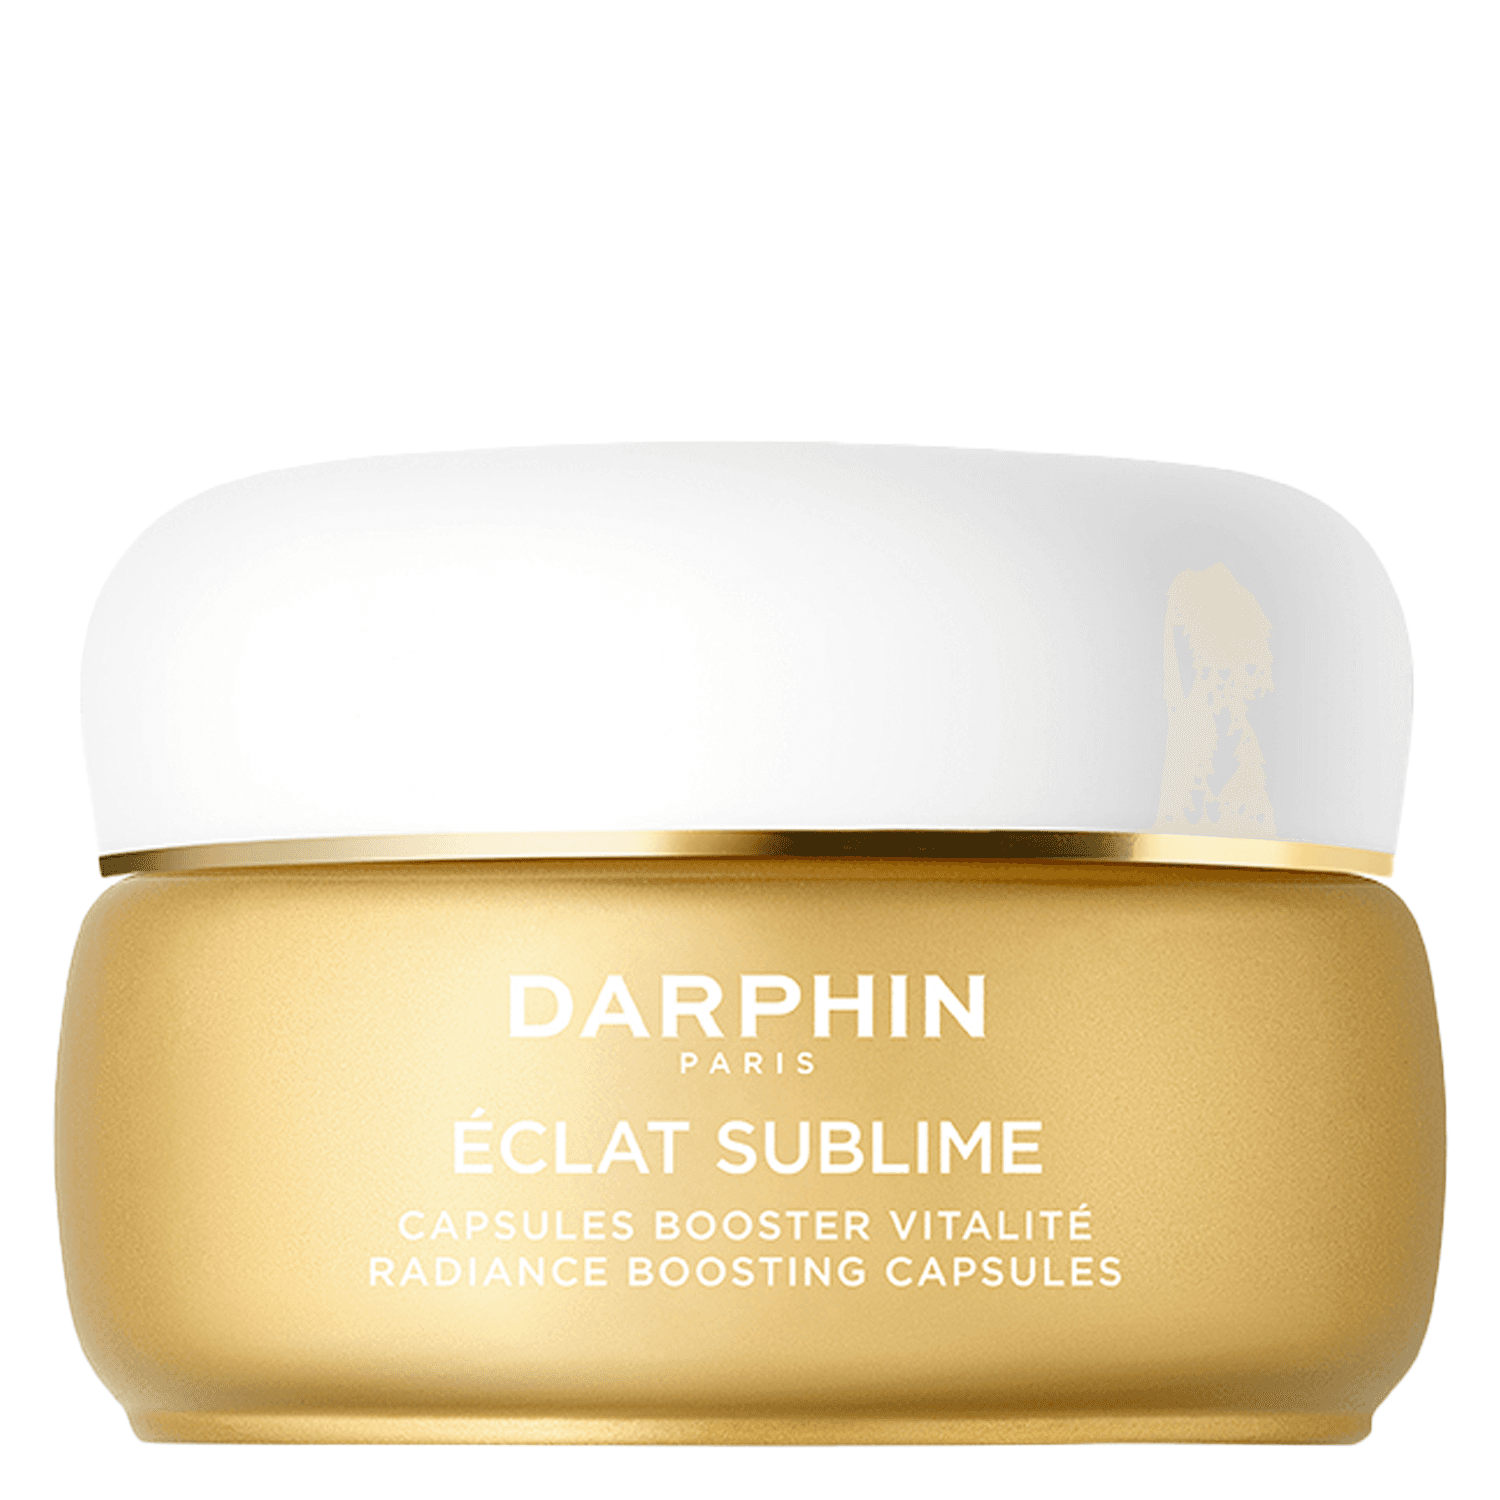 DARPHIN CARE - Eclat Sublime Radiance Boosting Capsules with Pro-Vitamine C & E